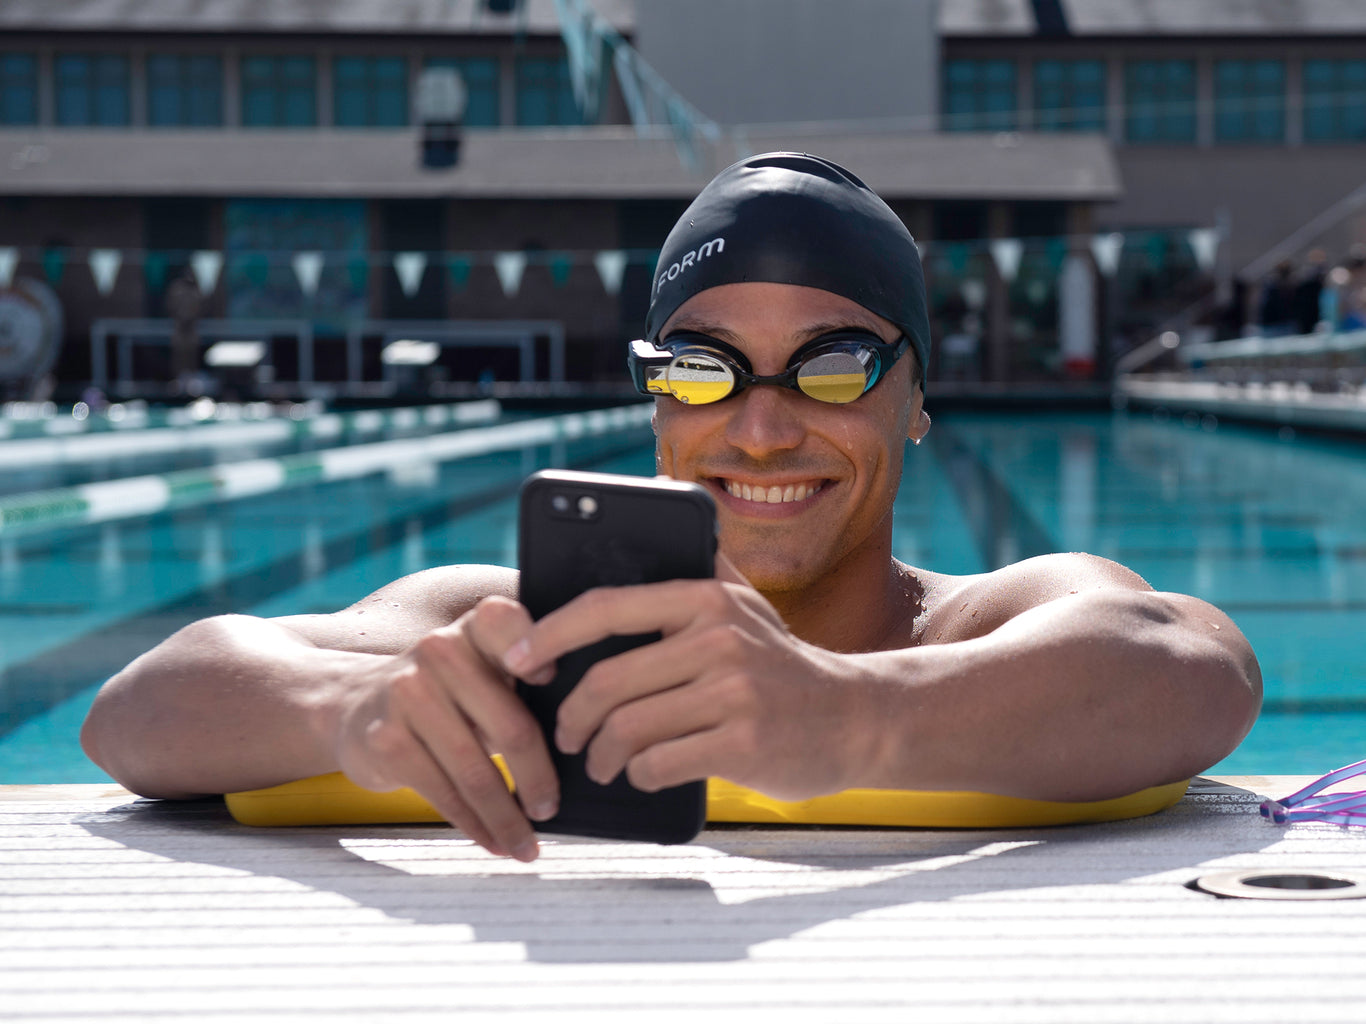 Social Sharing from the FORM Swim App